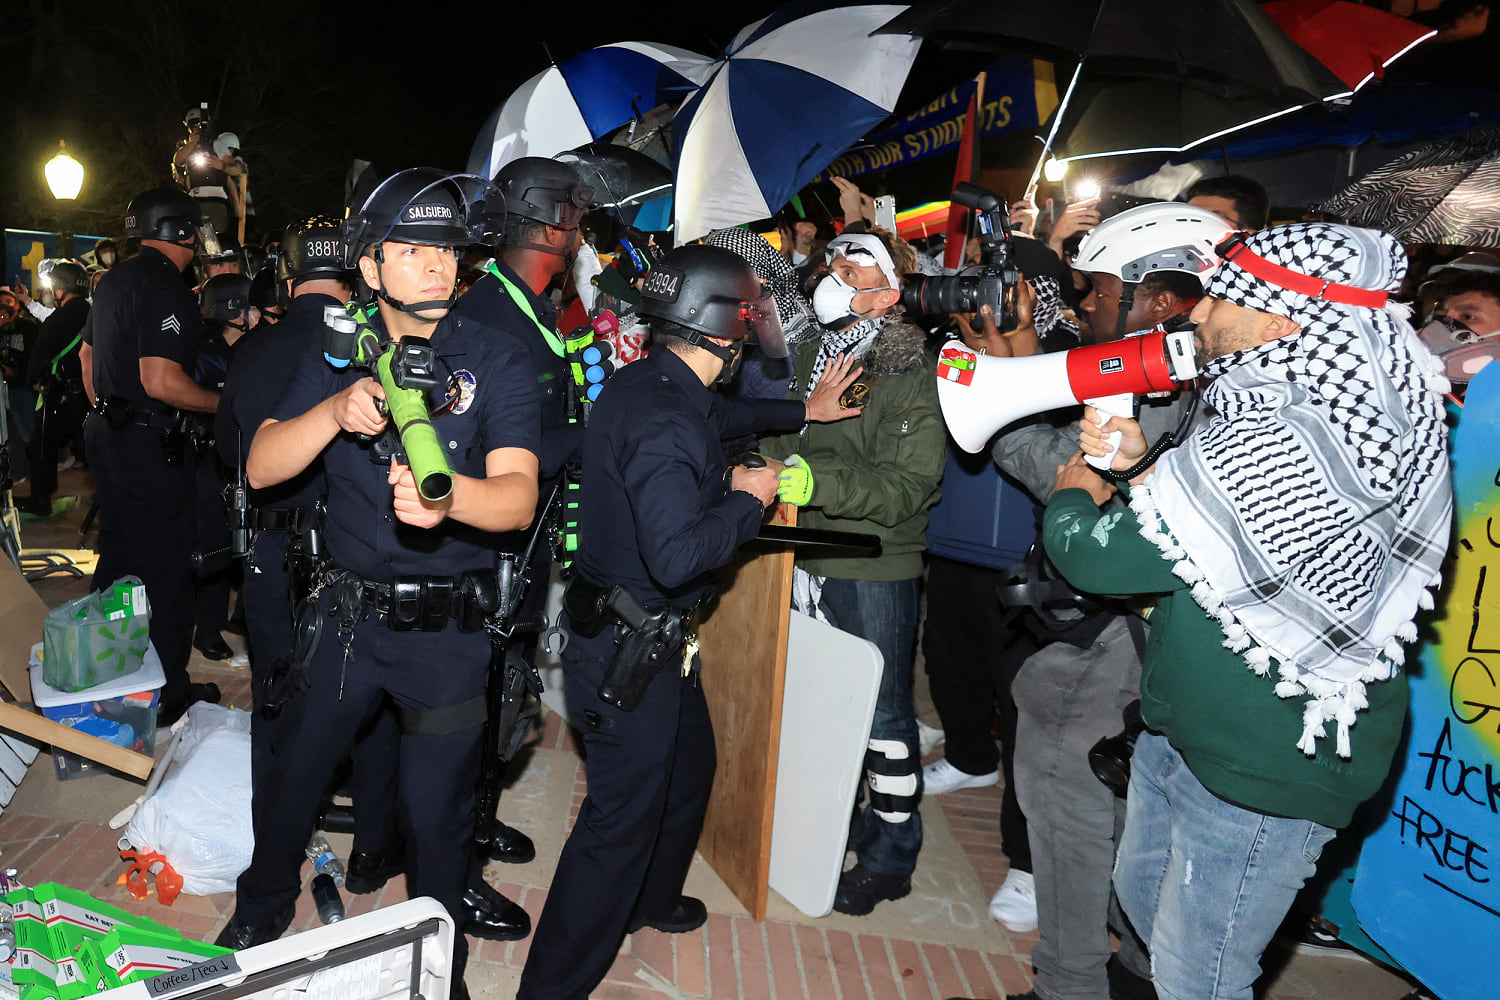 Police move in to clear UCLA encampment after protesters defy calls to leave